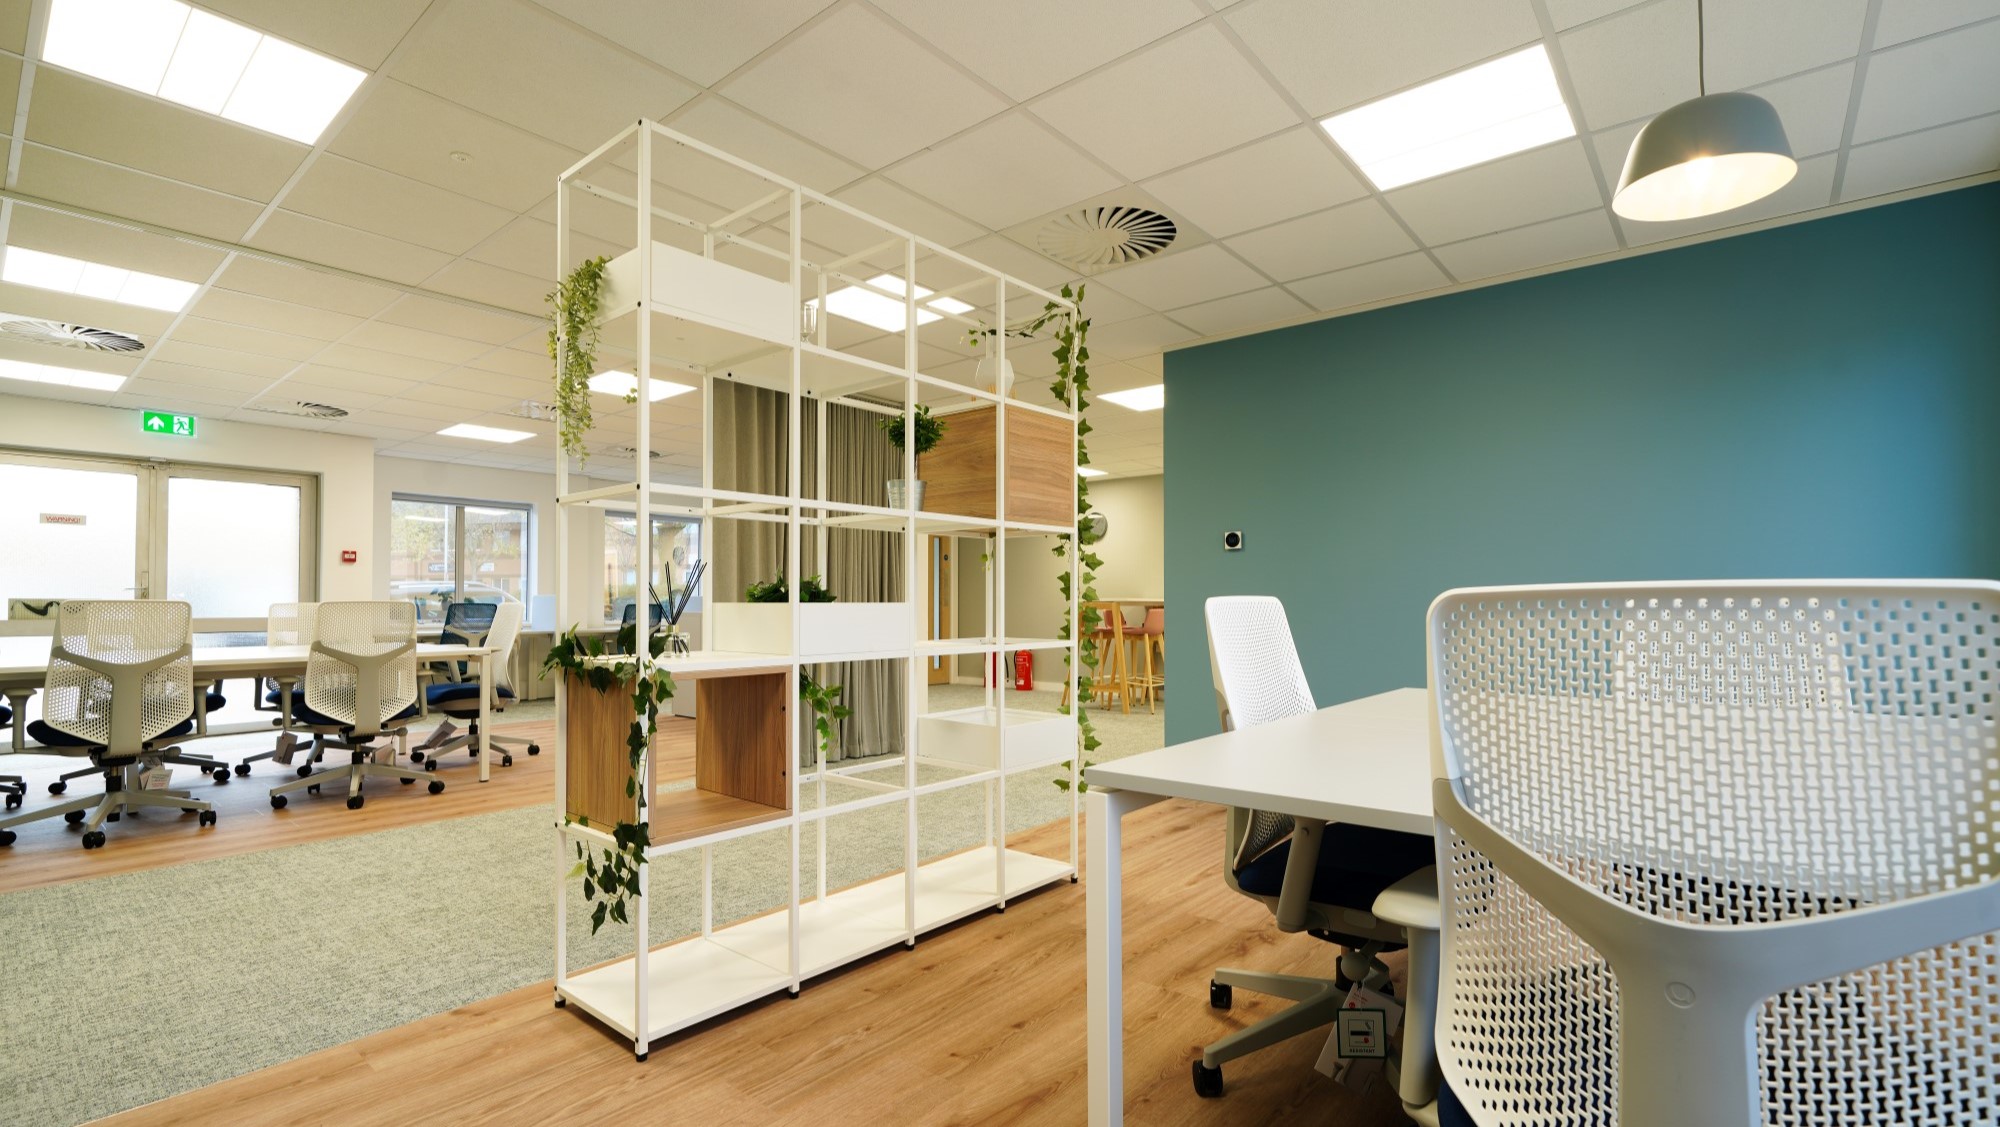 Grid Shelving Creating A Soft Barrier Between Work Areas